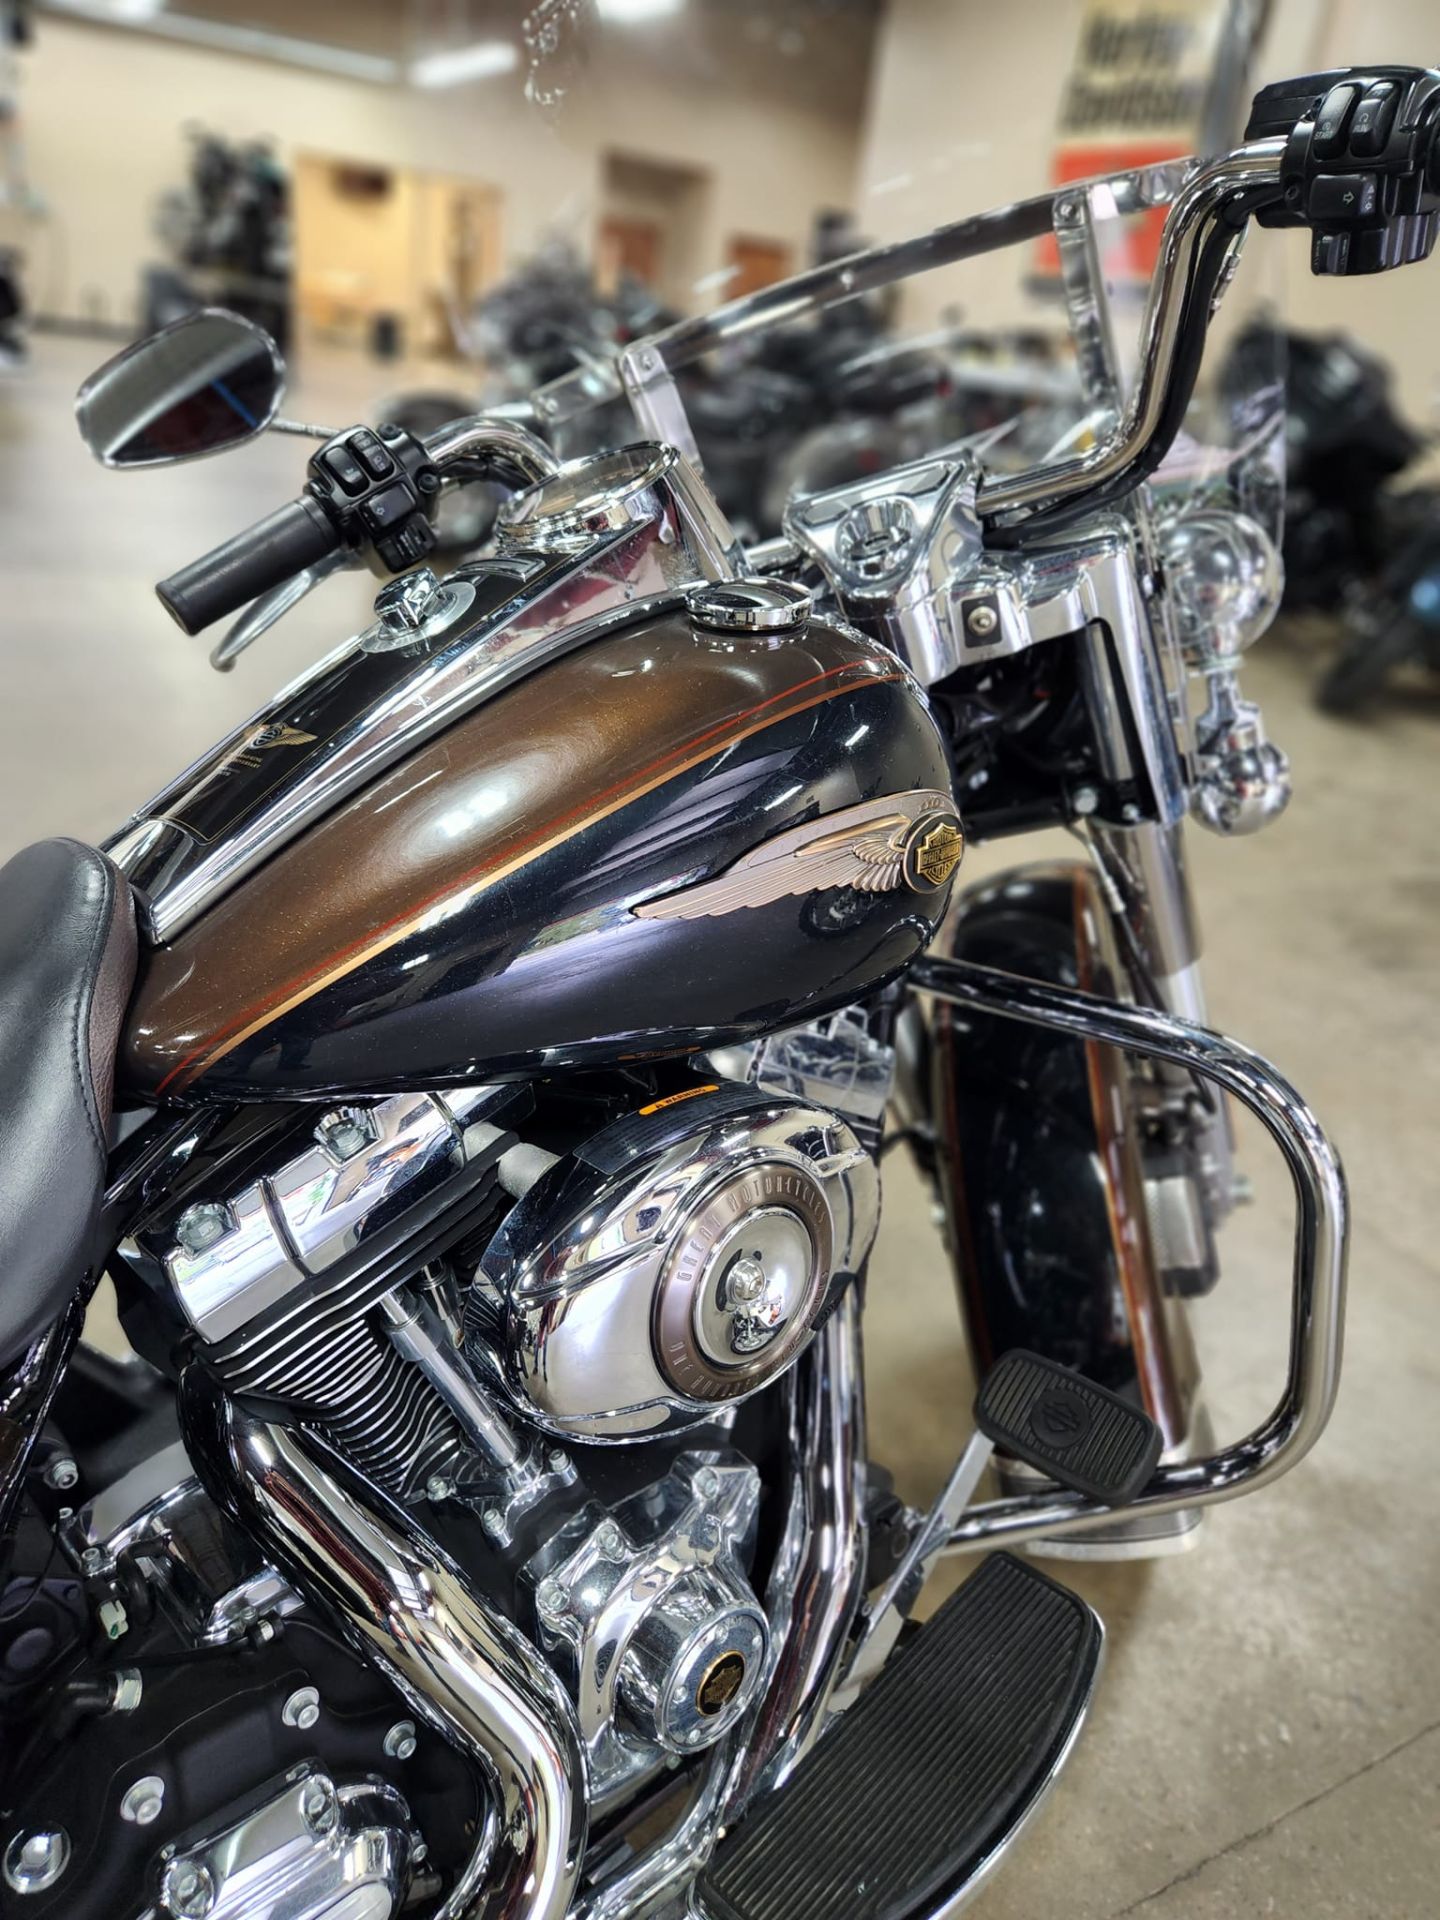 2013 Harley-Davidson Road King® 110th Anniversary Edition in Erie, Pennsylvania - Photo 2